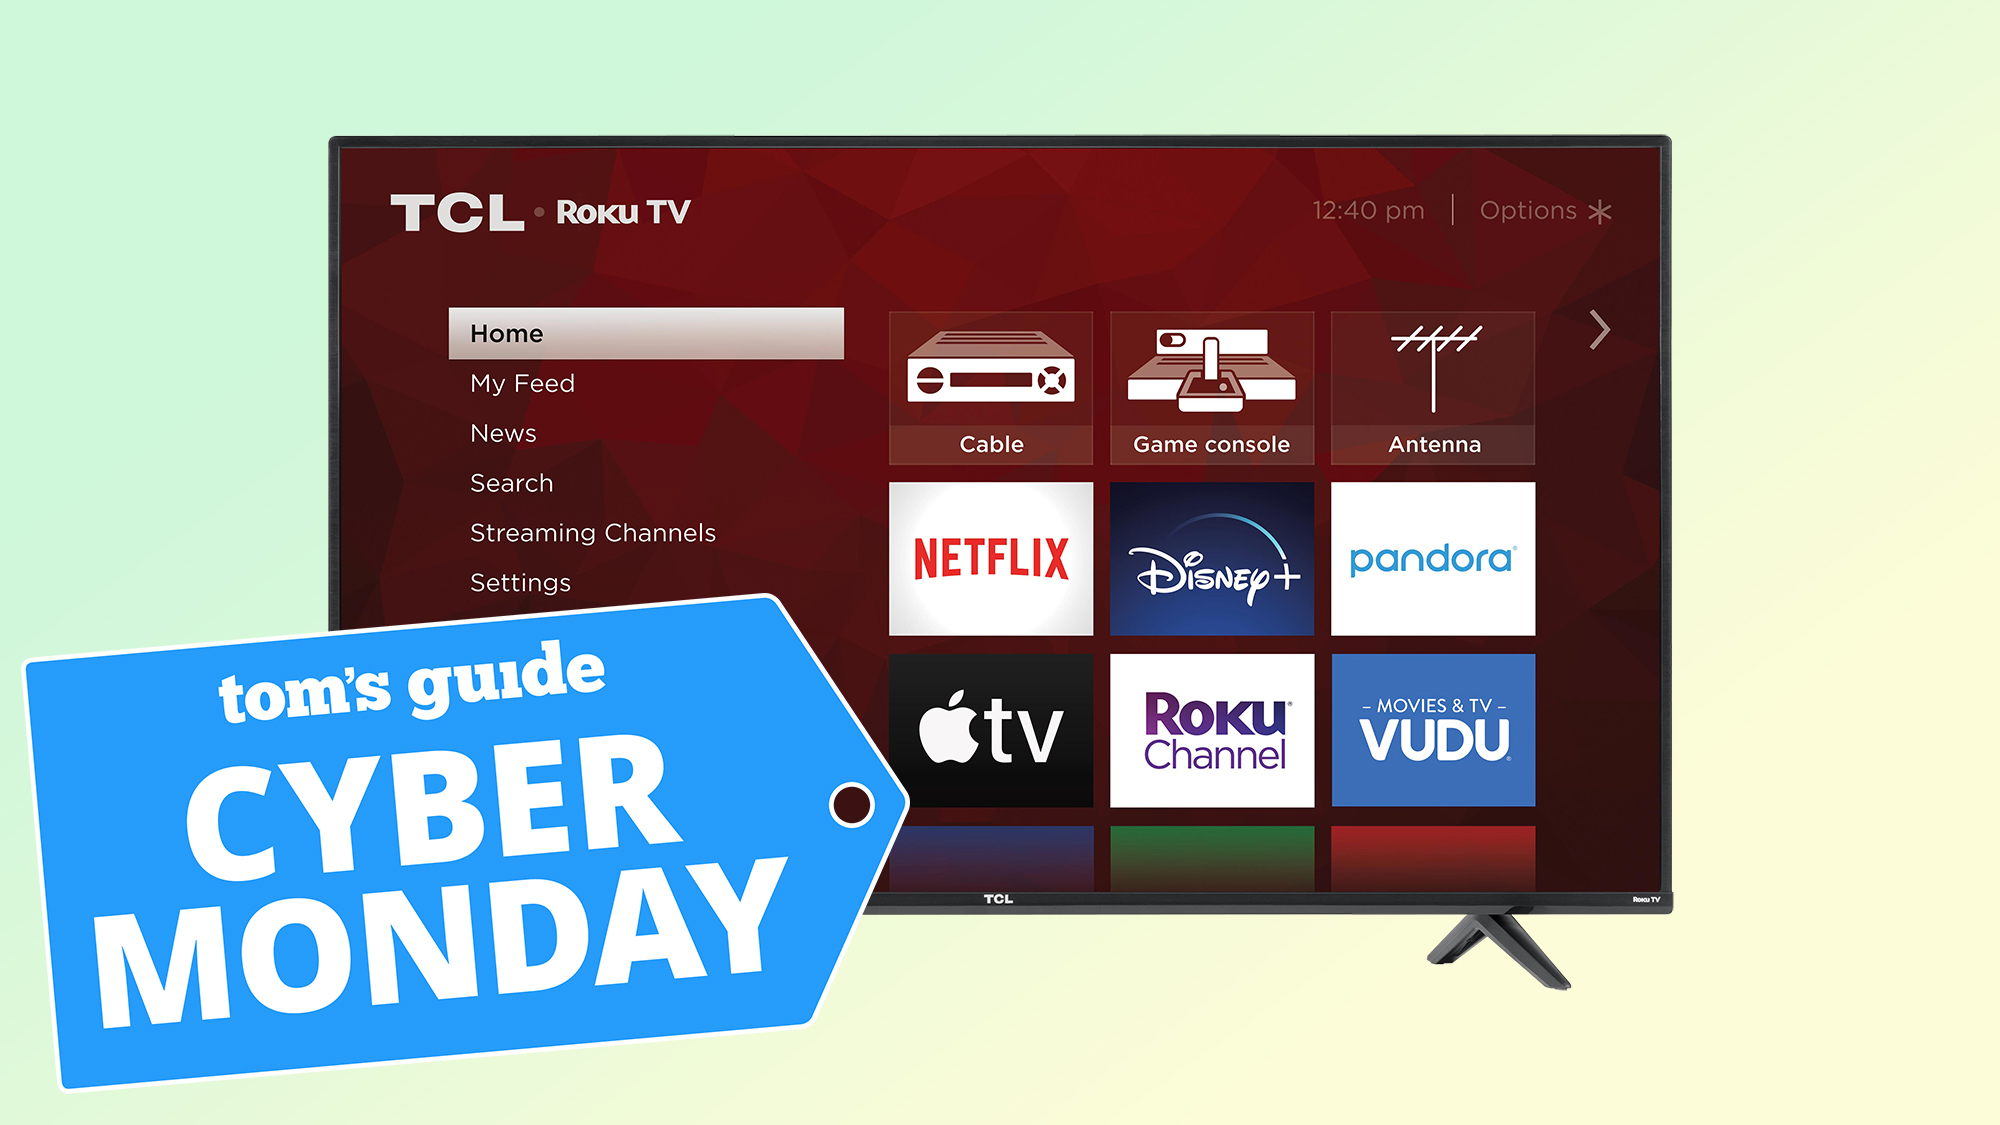 tcl 55-inch roku smart tv with cyber monday deal tag